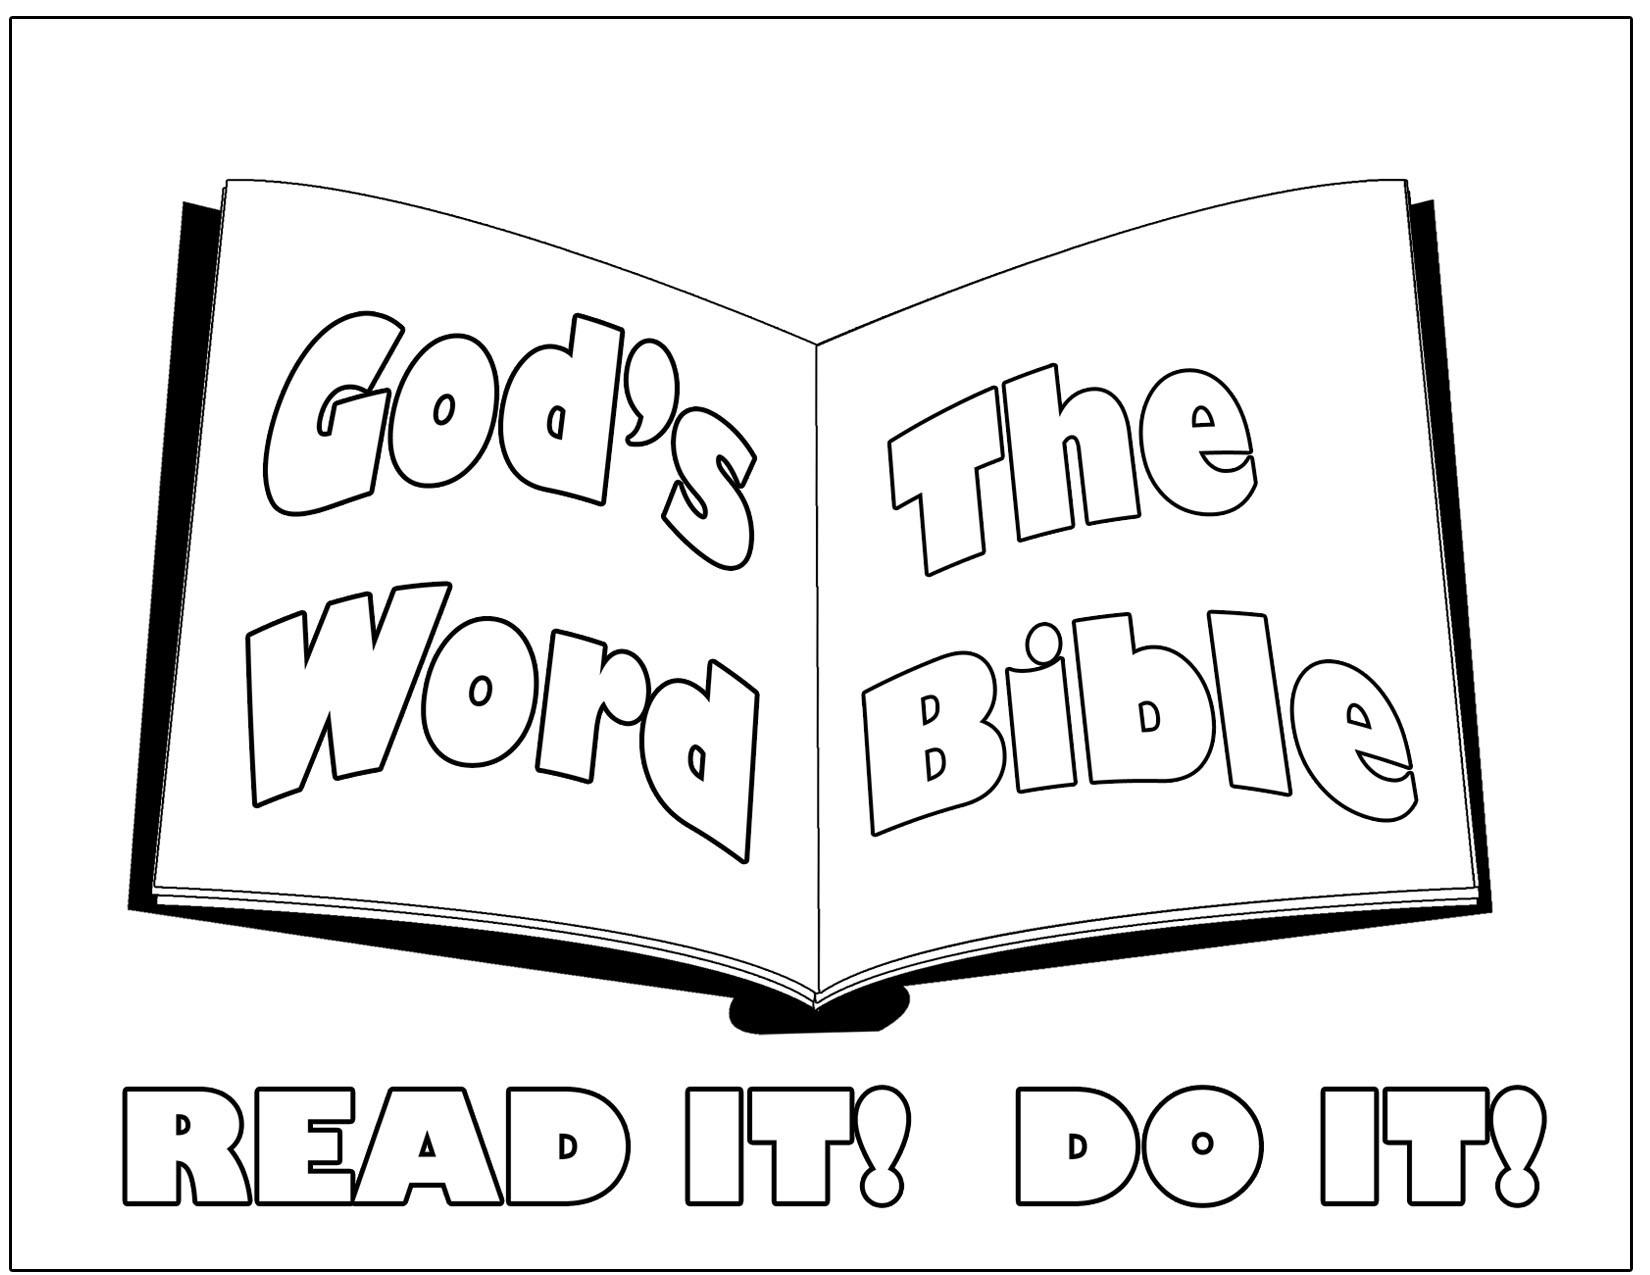 Free Printable Bible Coloring Pages For Kids Effy Moom Free Coloring Picture wallpaper give a chance to color on the wall without getting in trouble! Fill the walls of your home or office with stress-relieving [effymoom.blogspot.com]